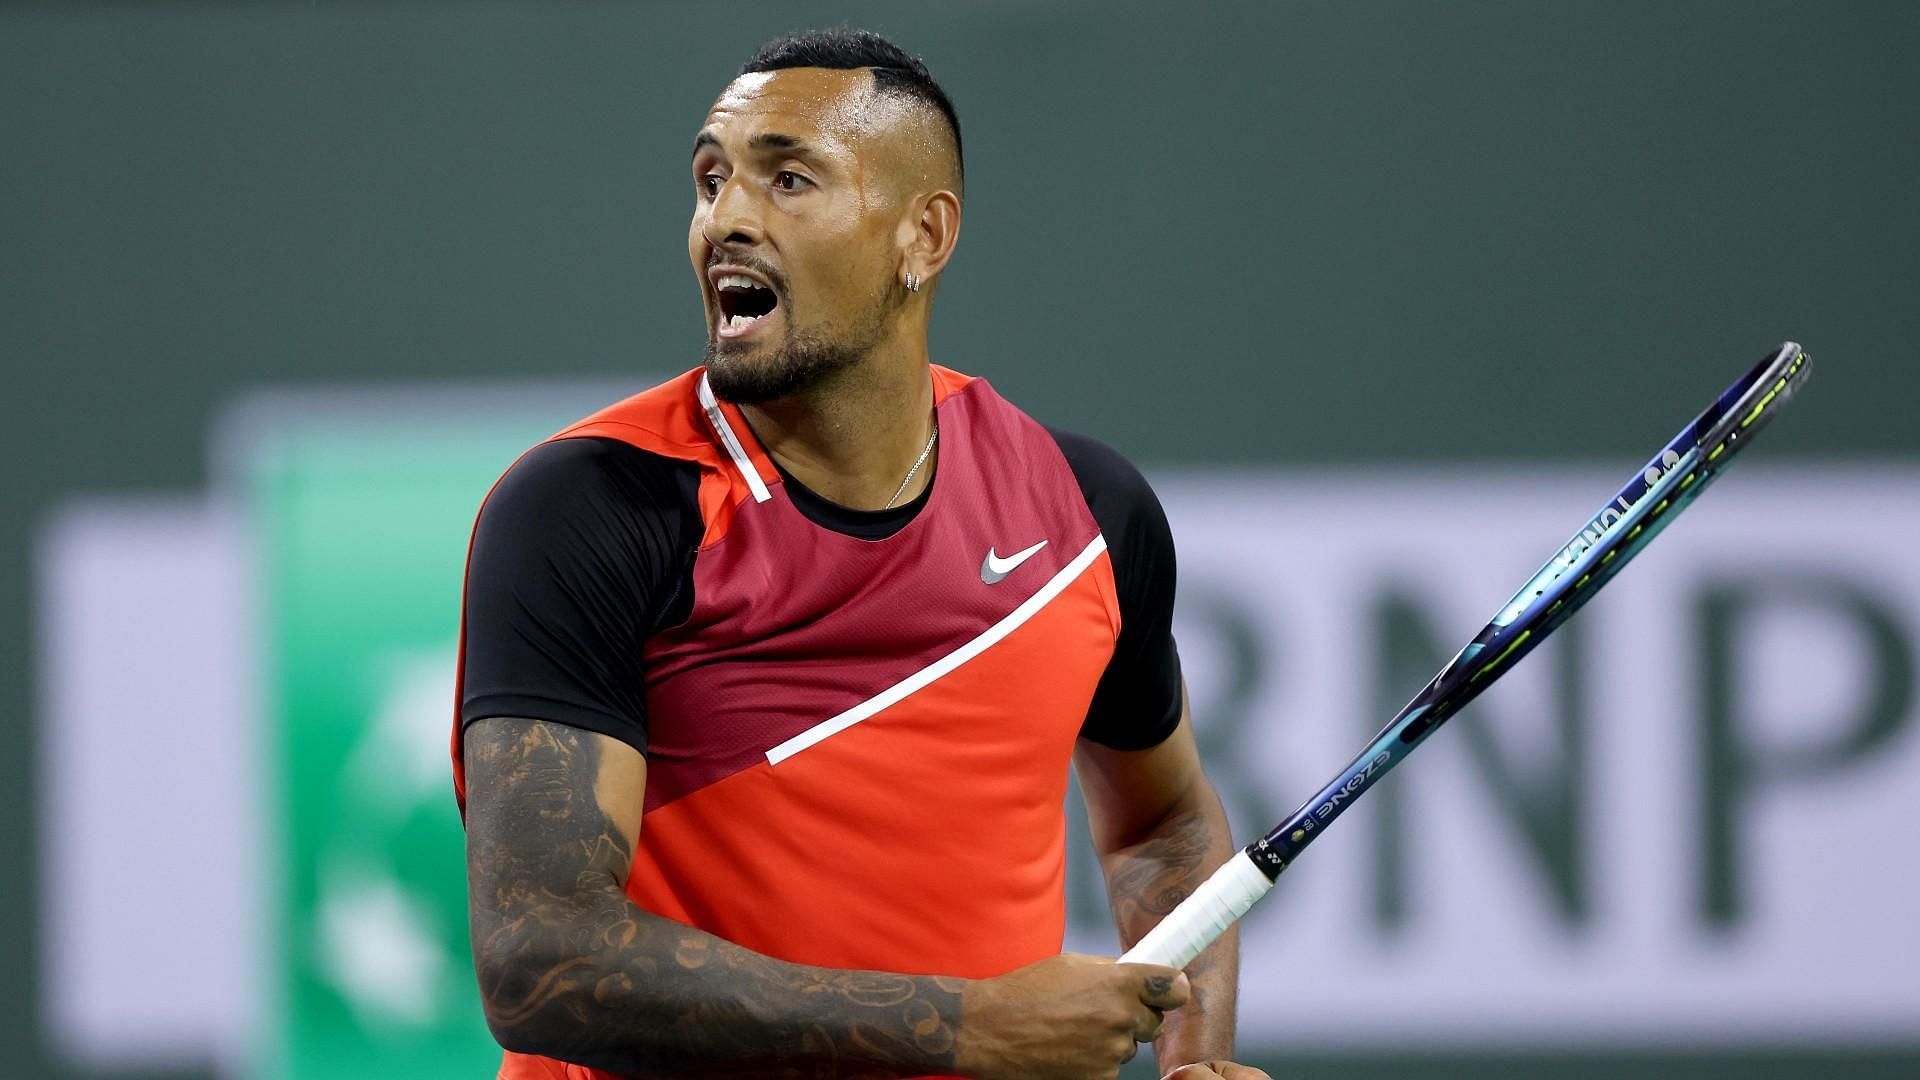 Nick Kyrgios demonstrated an explosive brand of tennis to win easily